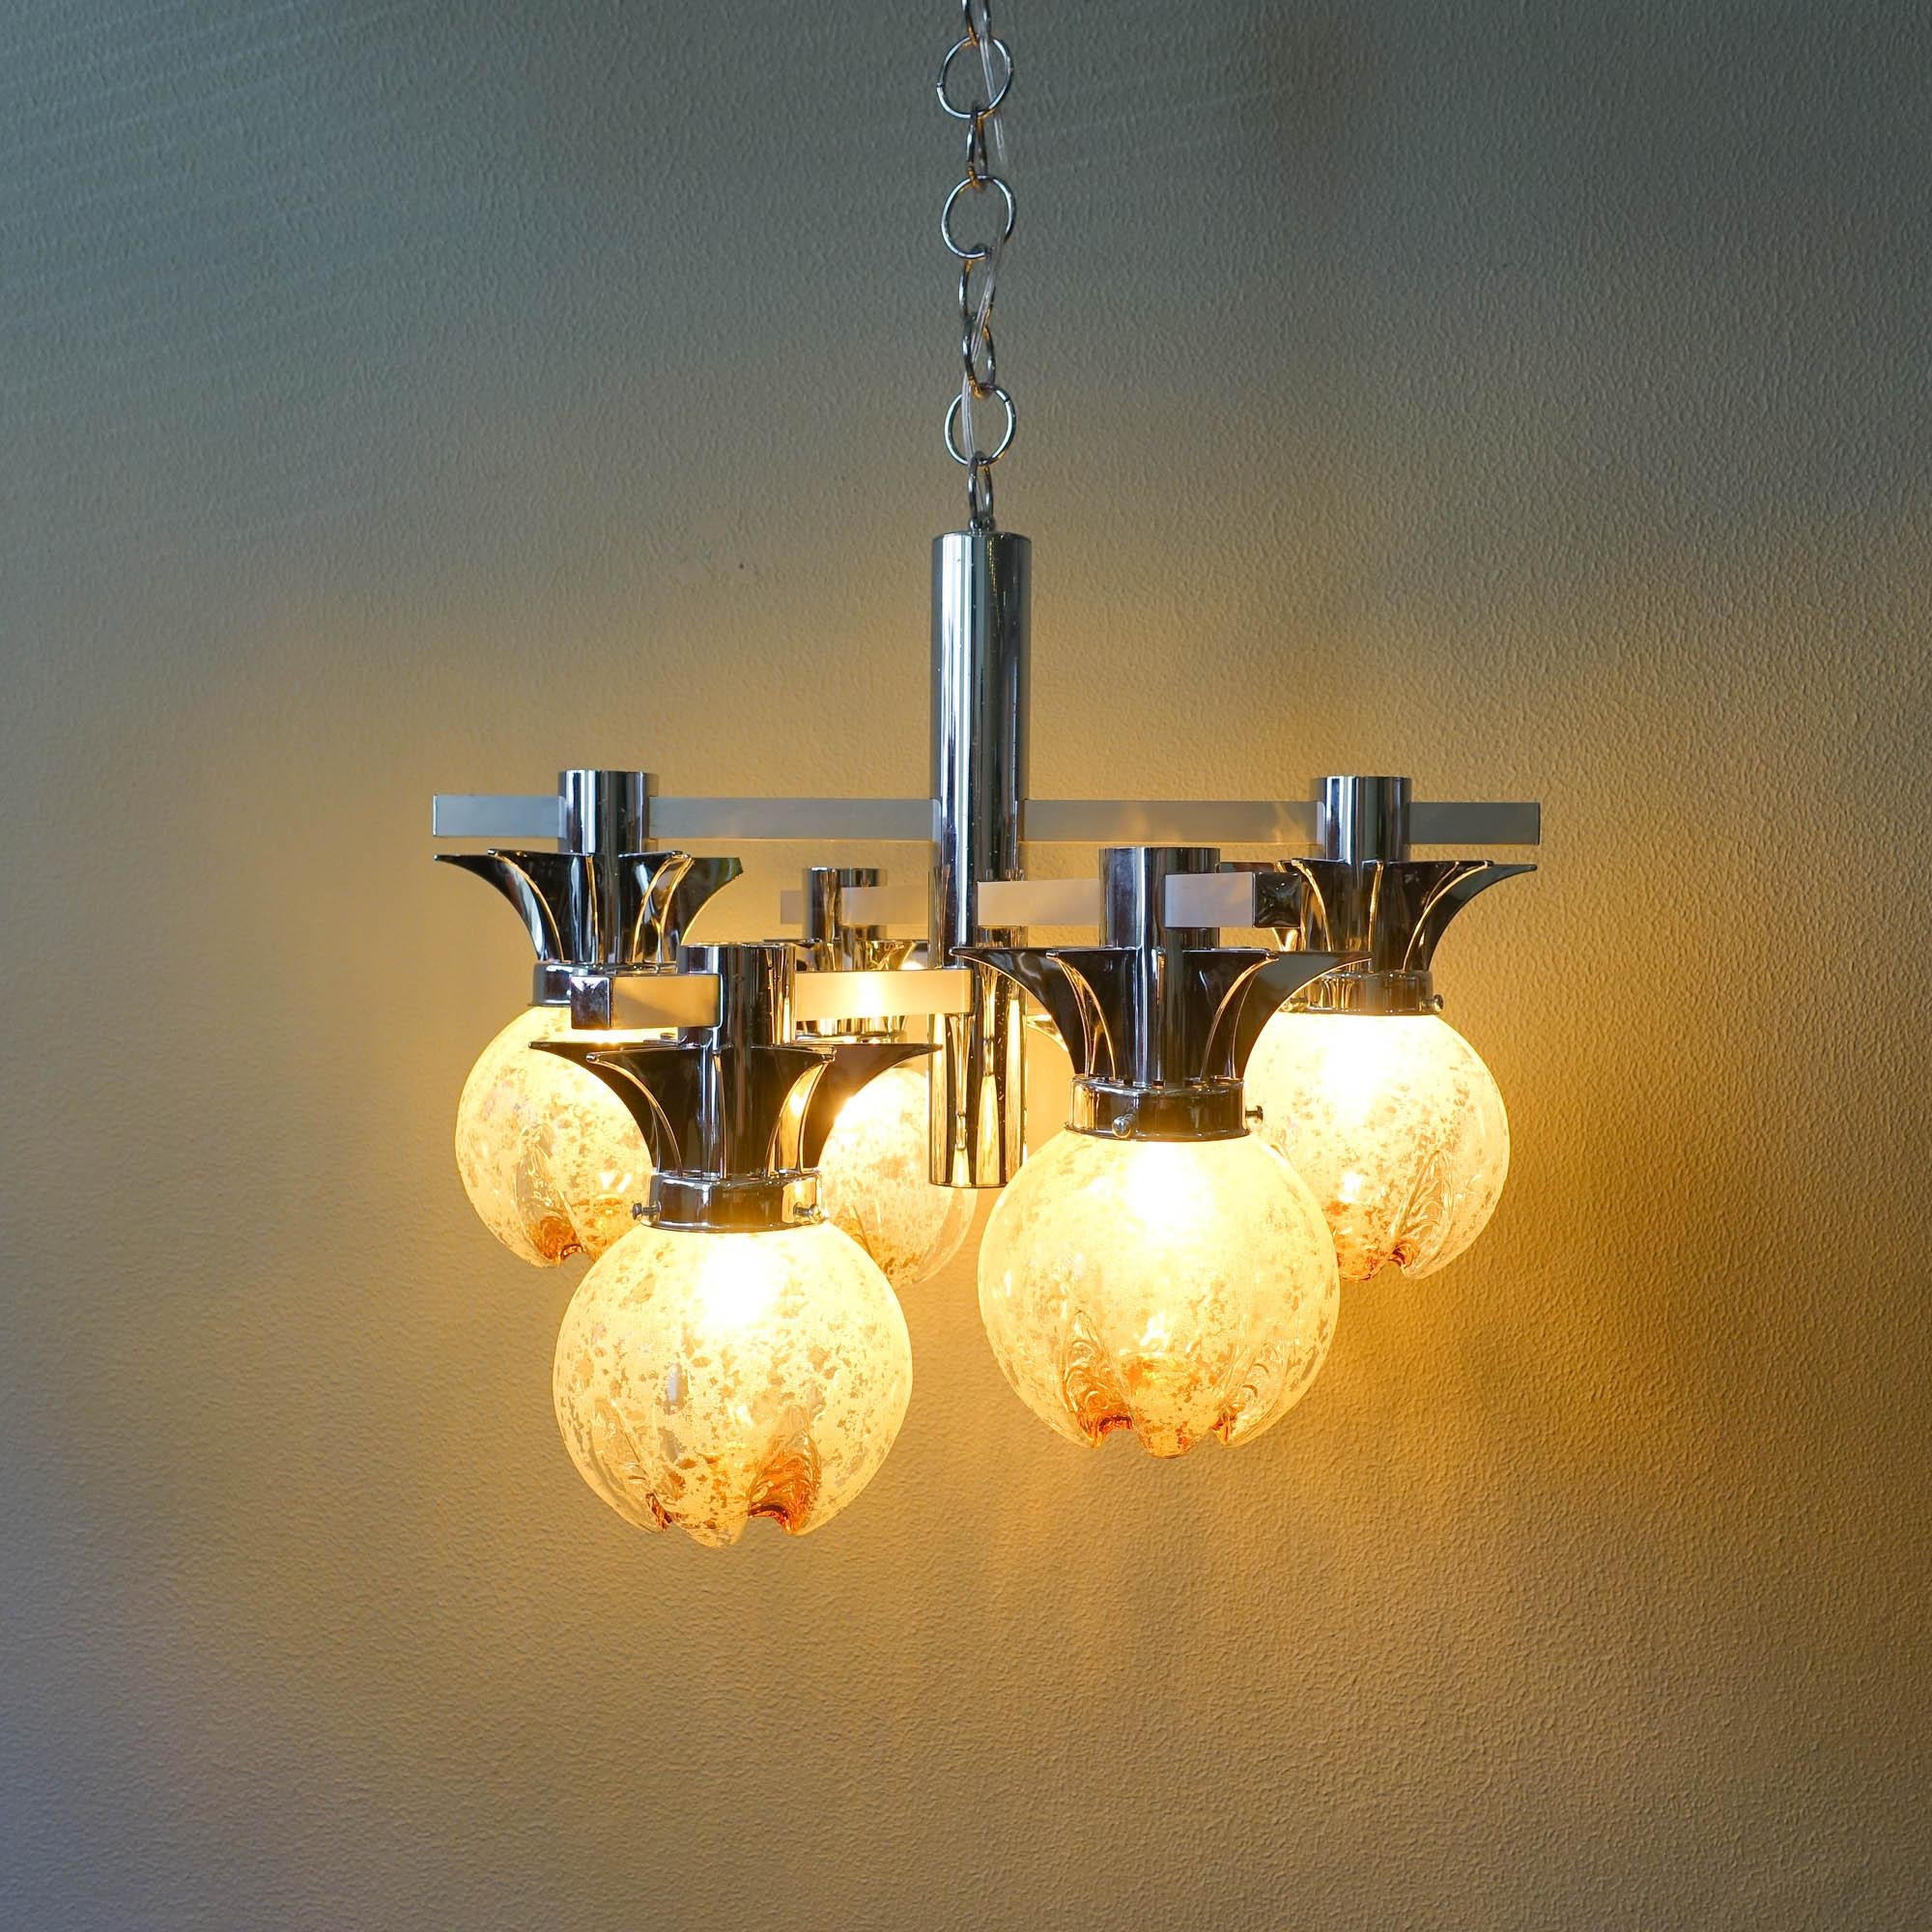 This pendant lamp was designed by Gaetano Sciolari for Mazzega, in Italy, during 1970's. It features six arms in an asymmetric chromed metal frame. In each arm is a murano glass globe that goes from transparent white to orange-amber gold glass.